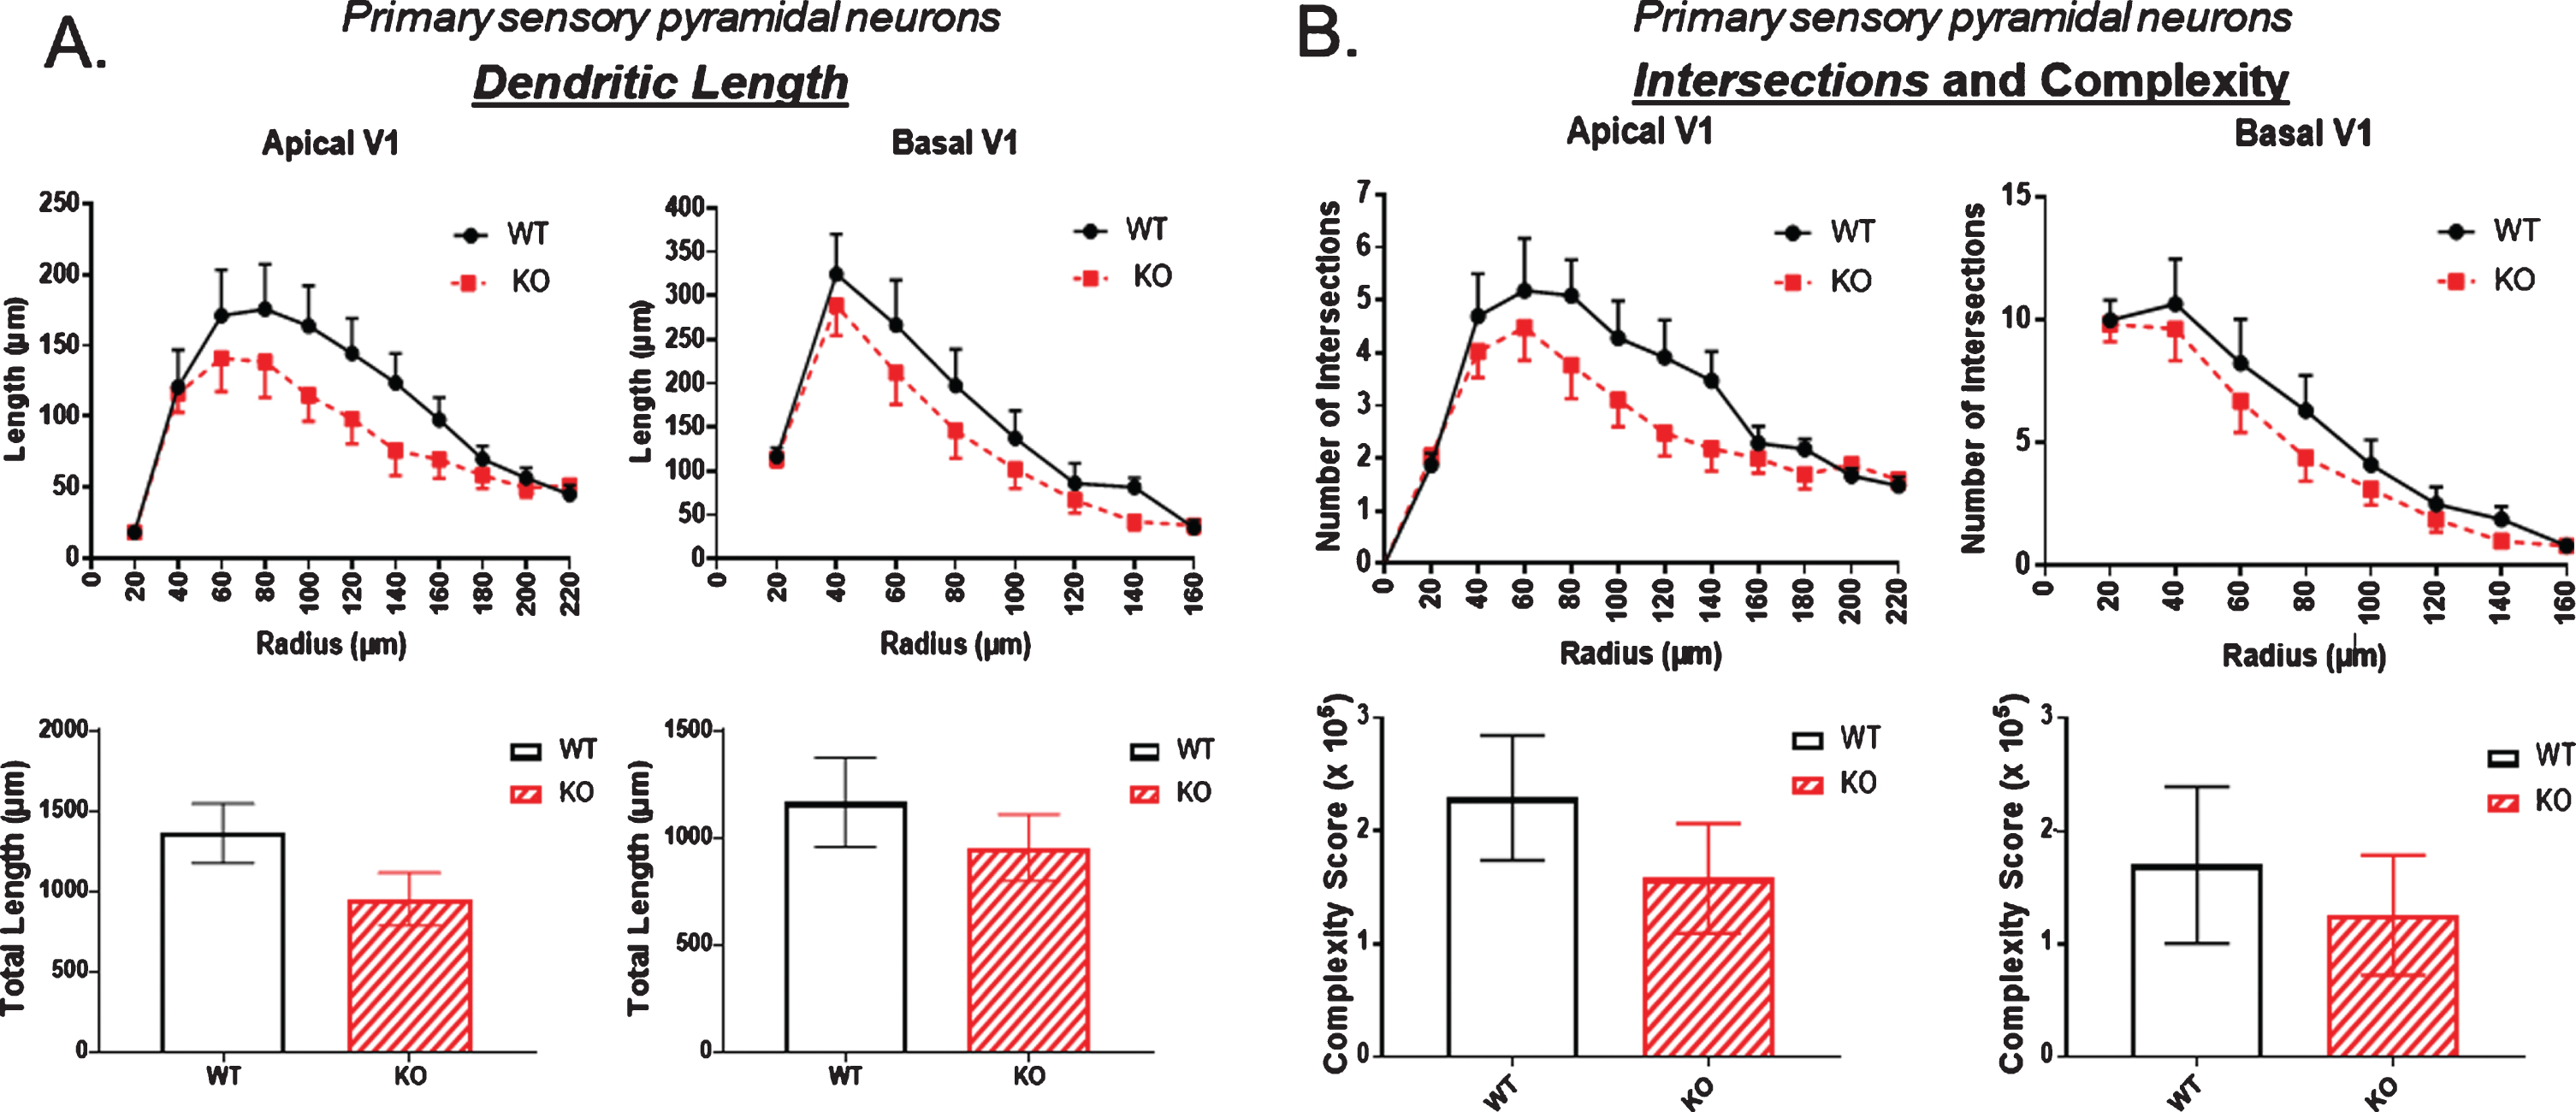 In the primary sensory cortex there was a consistent trend towards A) reduced dendritic length and B) reduced dendritic complexity in KO versus WT mice, but these reductions were not statistically significant. Data represent the mean±SEM of measurements from 9 WT and 15 KO mice, and were analyzed by Student’s t-test for unpaired data.